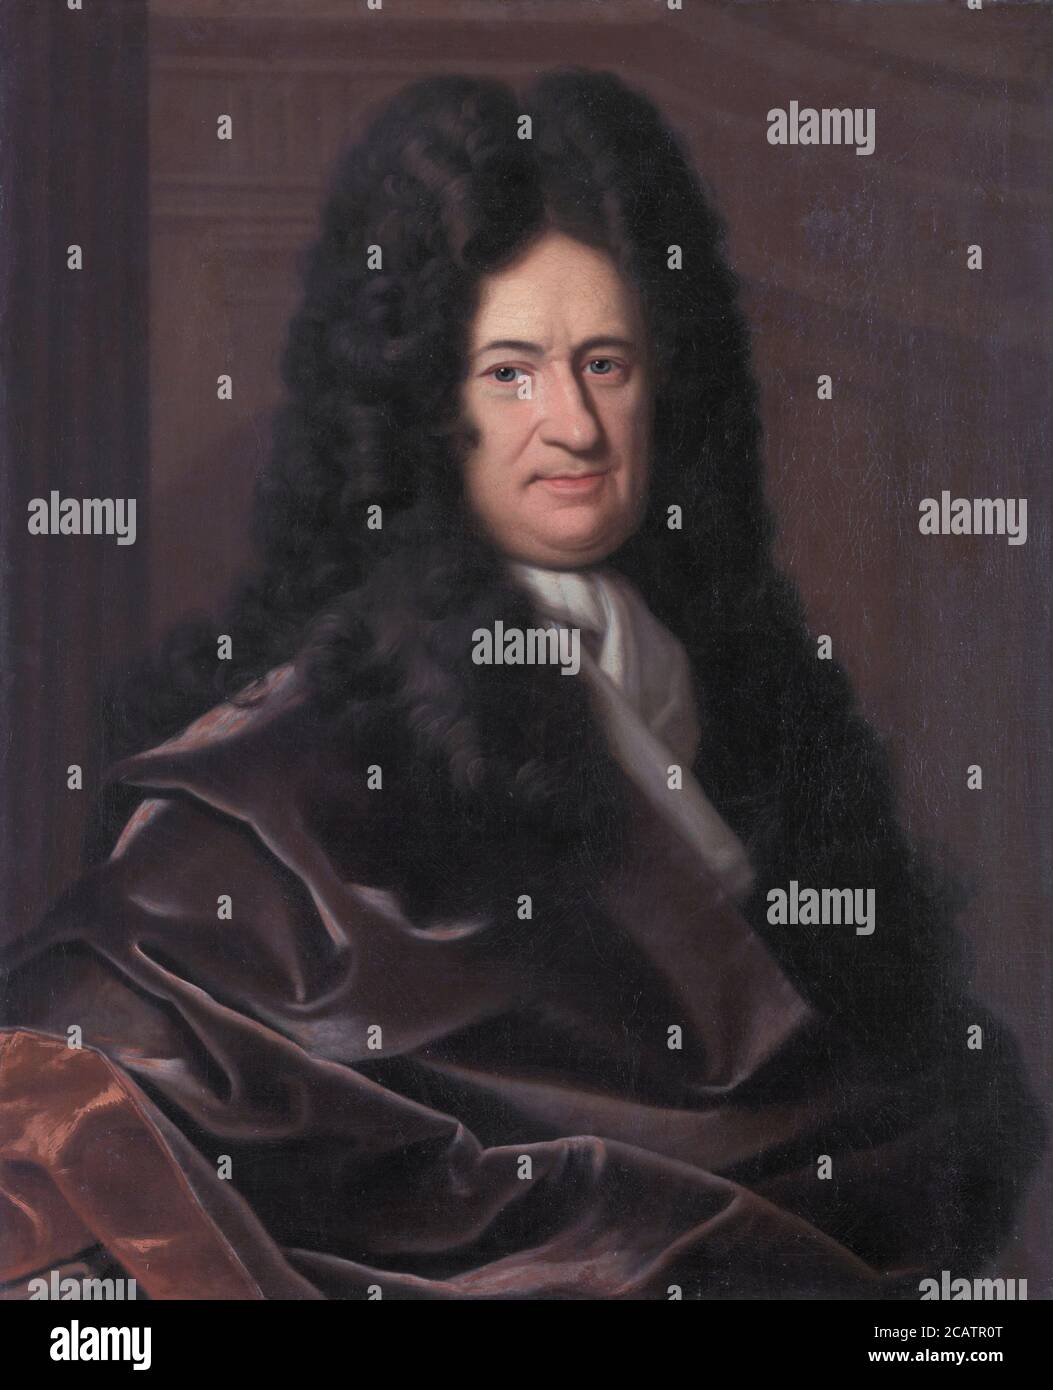 Portrait of Gottfried Wilhelm Leibniz by Bernhard Christoph Francke oil on canvas. Gottfried Wilhelm (von) Leibniz (sometimes spelled Leibnitz) (1 July 1646 [O.S. 21 June] – 14 November 1716) was a prominent German polymath and one of the most important logicians, mathematicians and natural philosophers of the Enlightenment. As a representative of the seventeenth-century tradition of rationalism, Leibniz developed, as his most prominent accomplishment, the ideas of differential and integral calculus, independently of Isaac Newton's contemporaneous developments Stock Photo